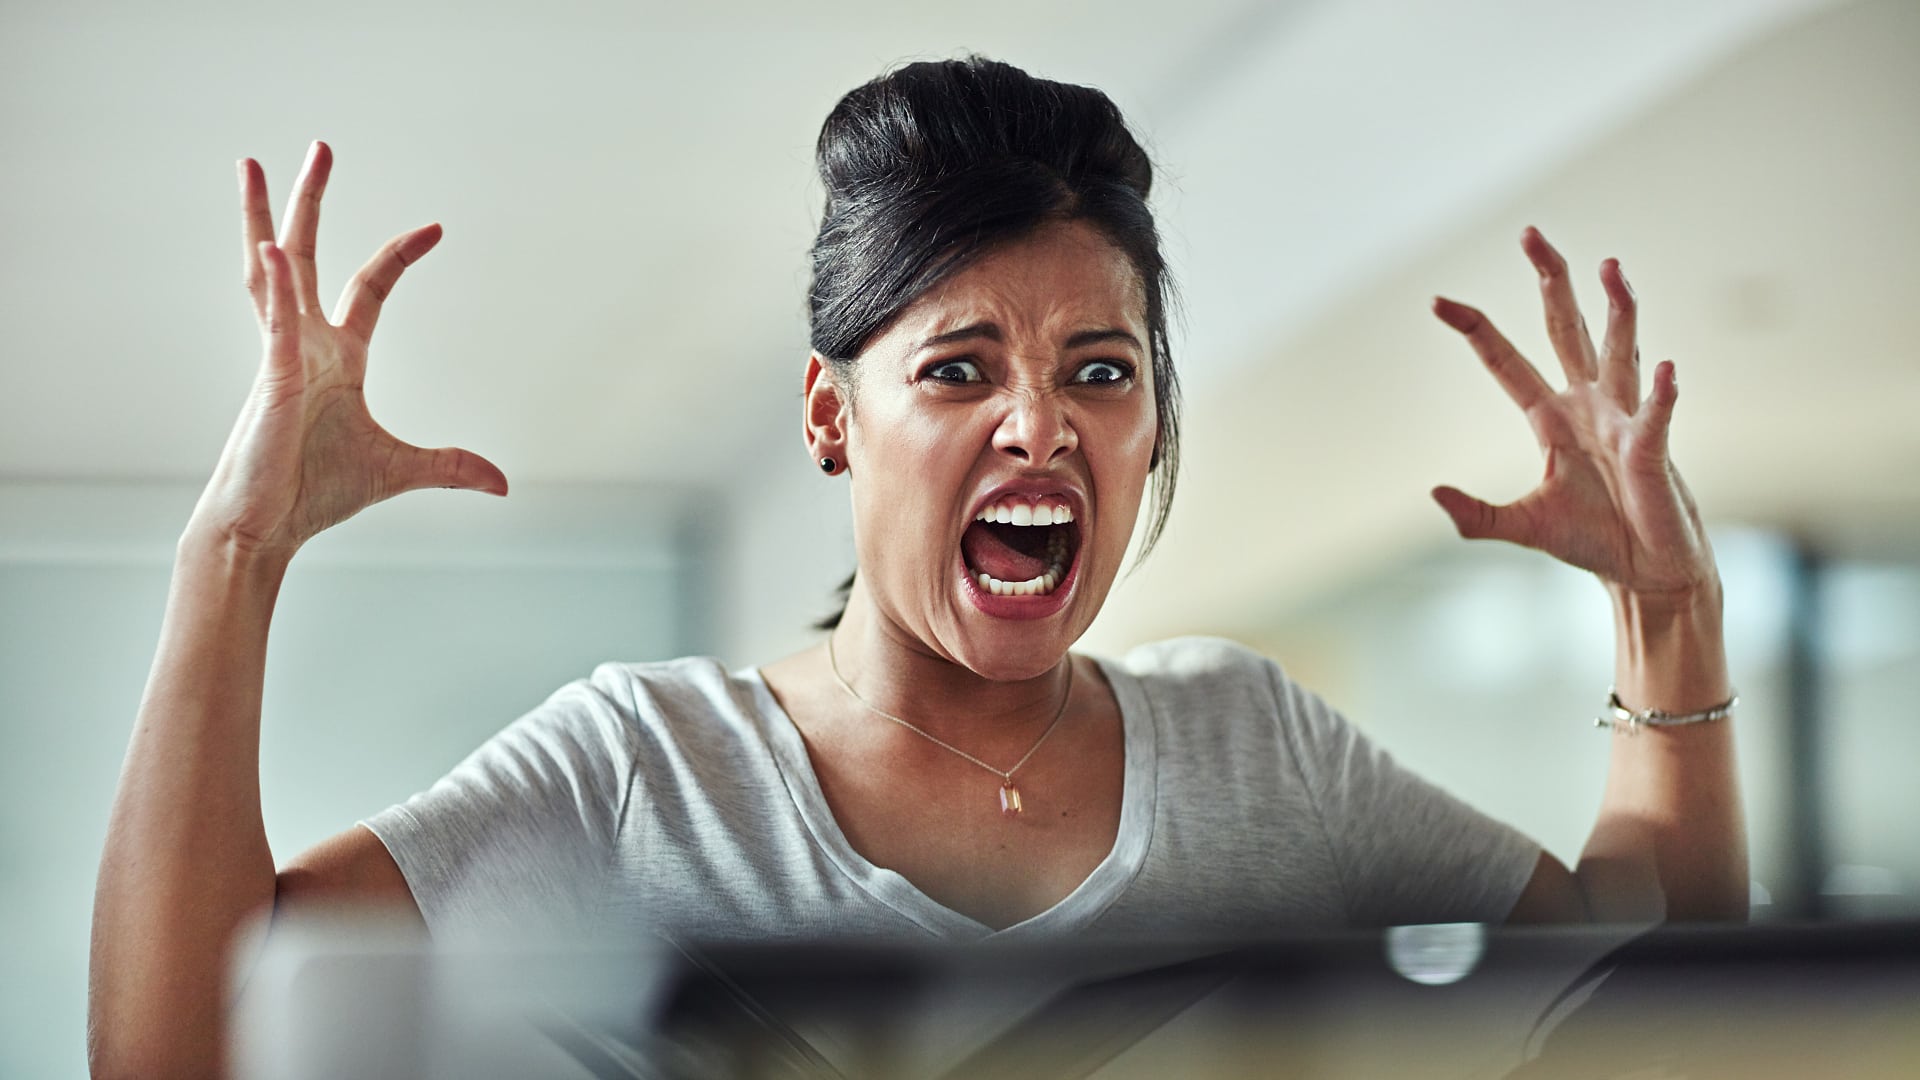 Communication: Human screaming is more complex